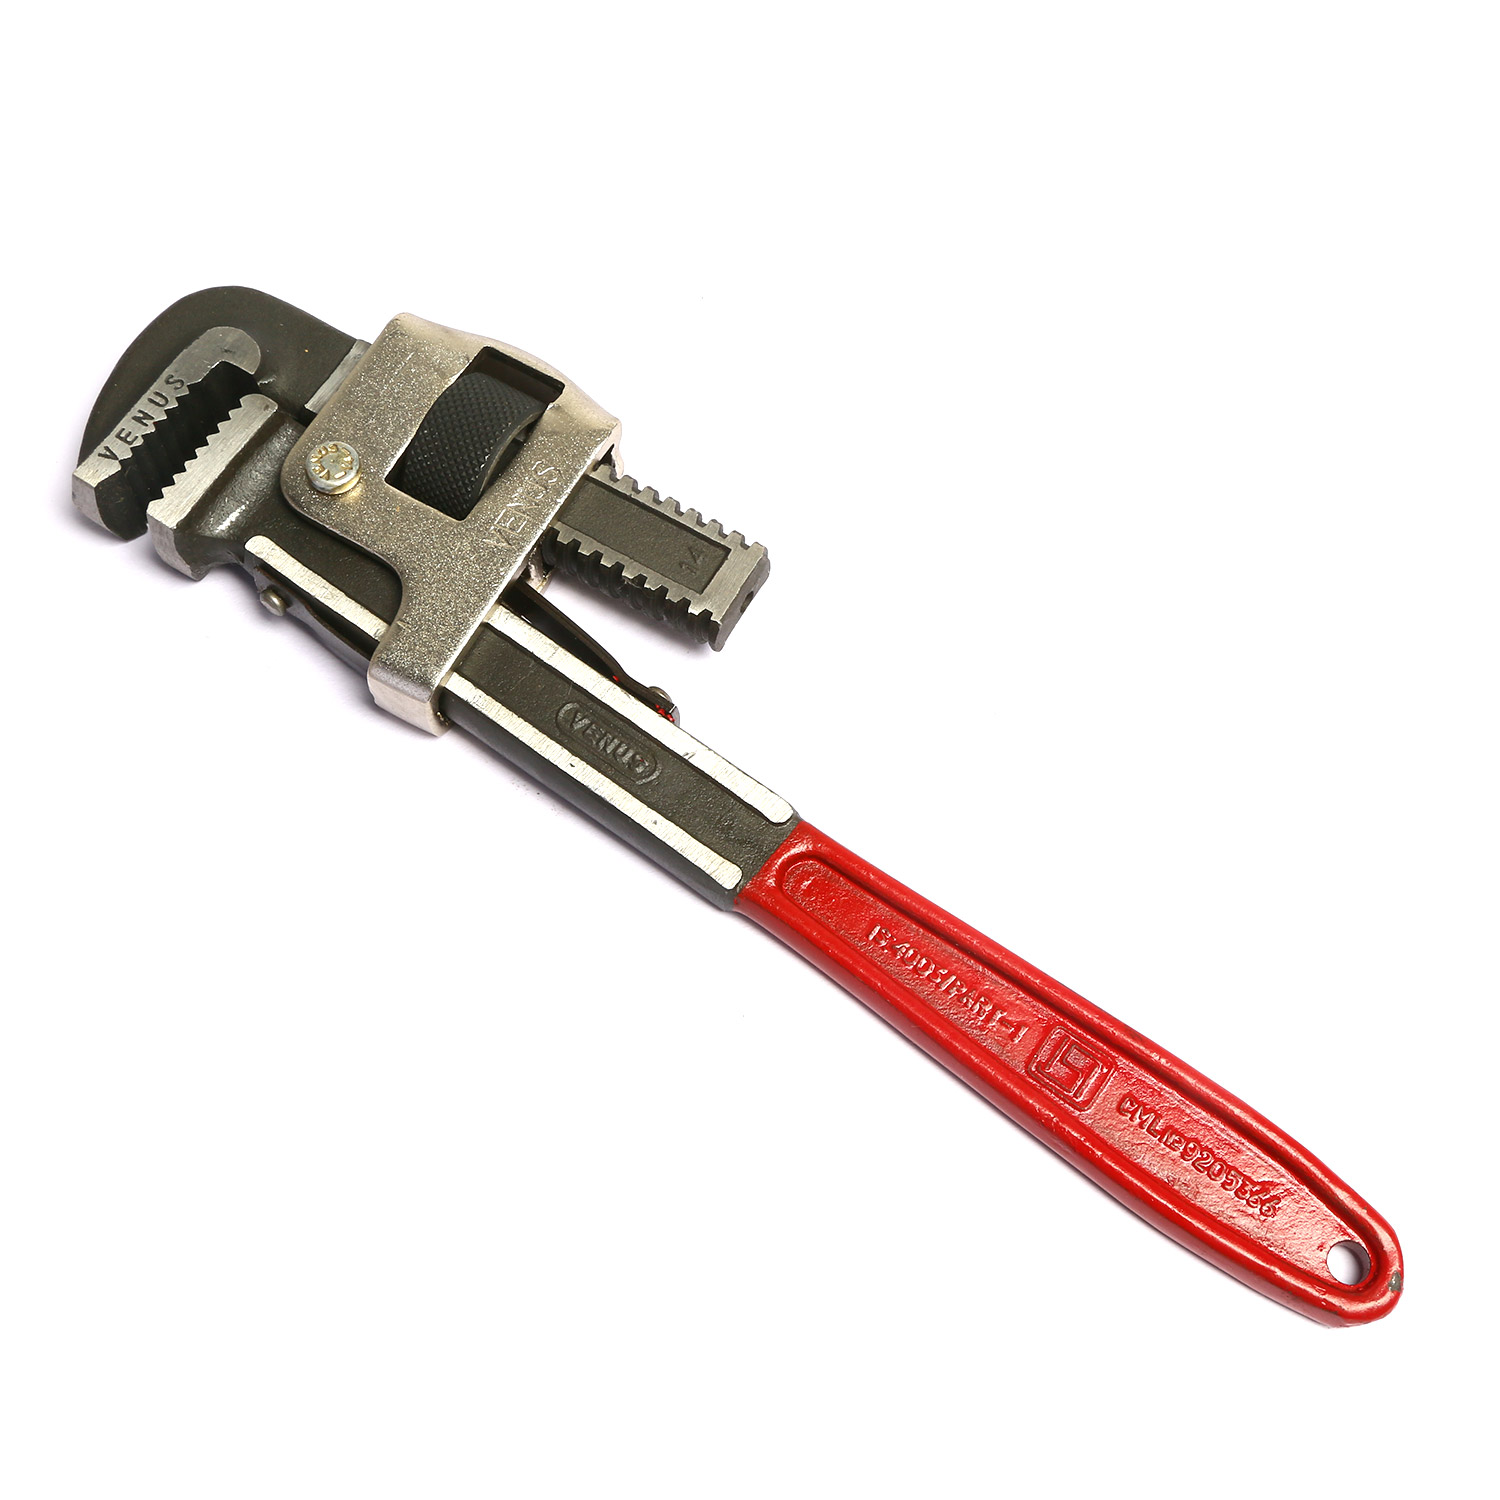 Buy Venus 225 Pipe Wrenches - Pipe Wrenches - Best Price on Tolexo